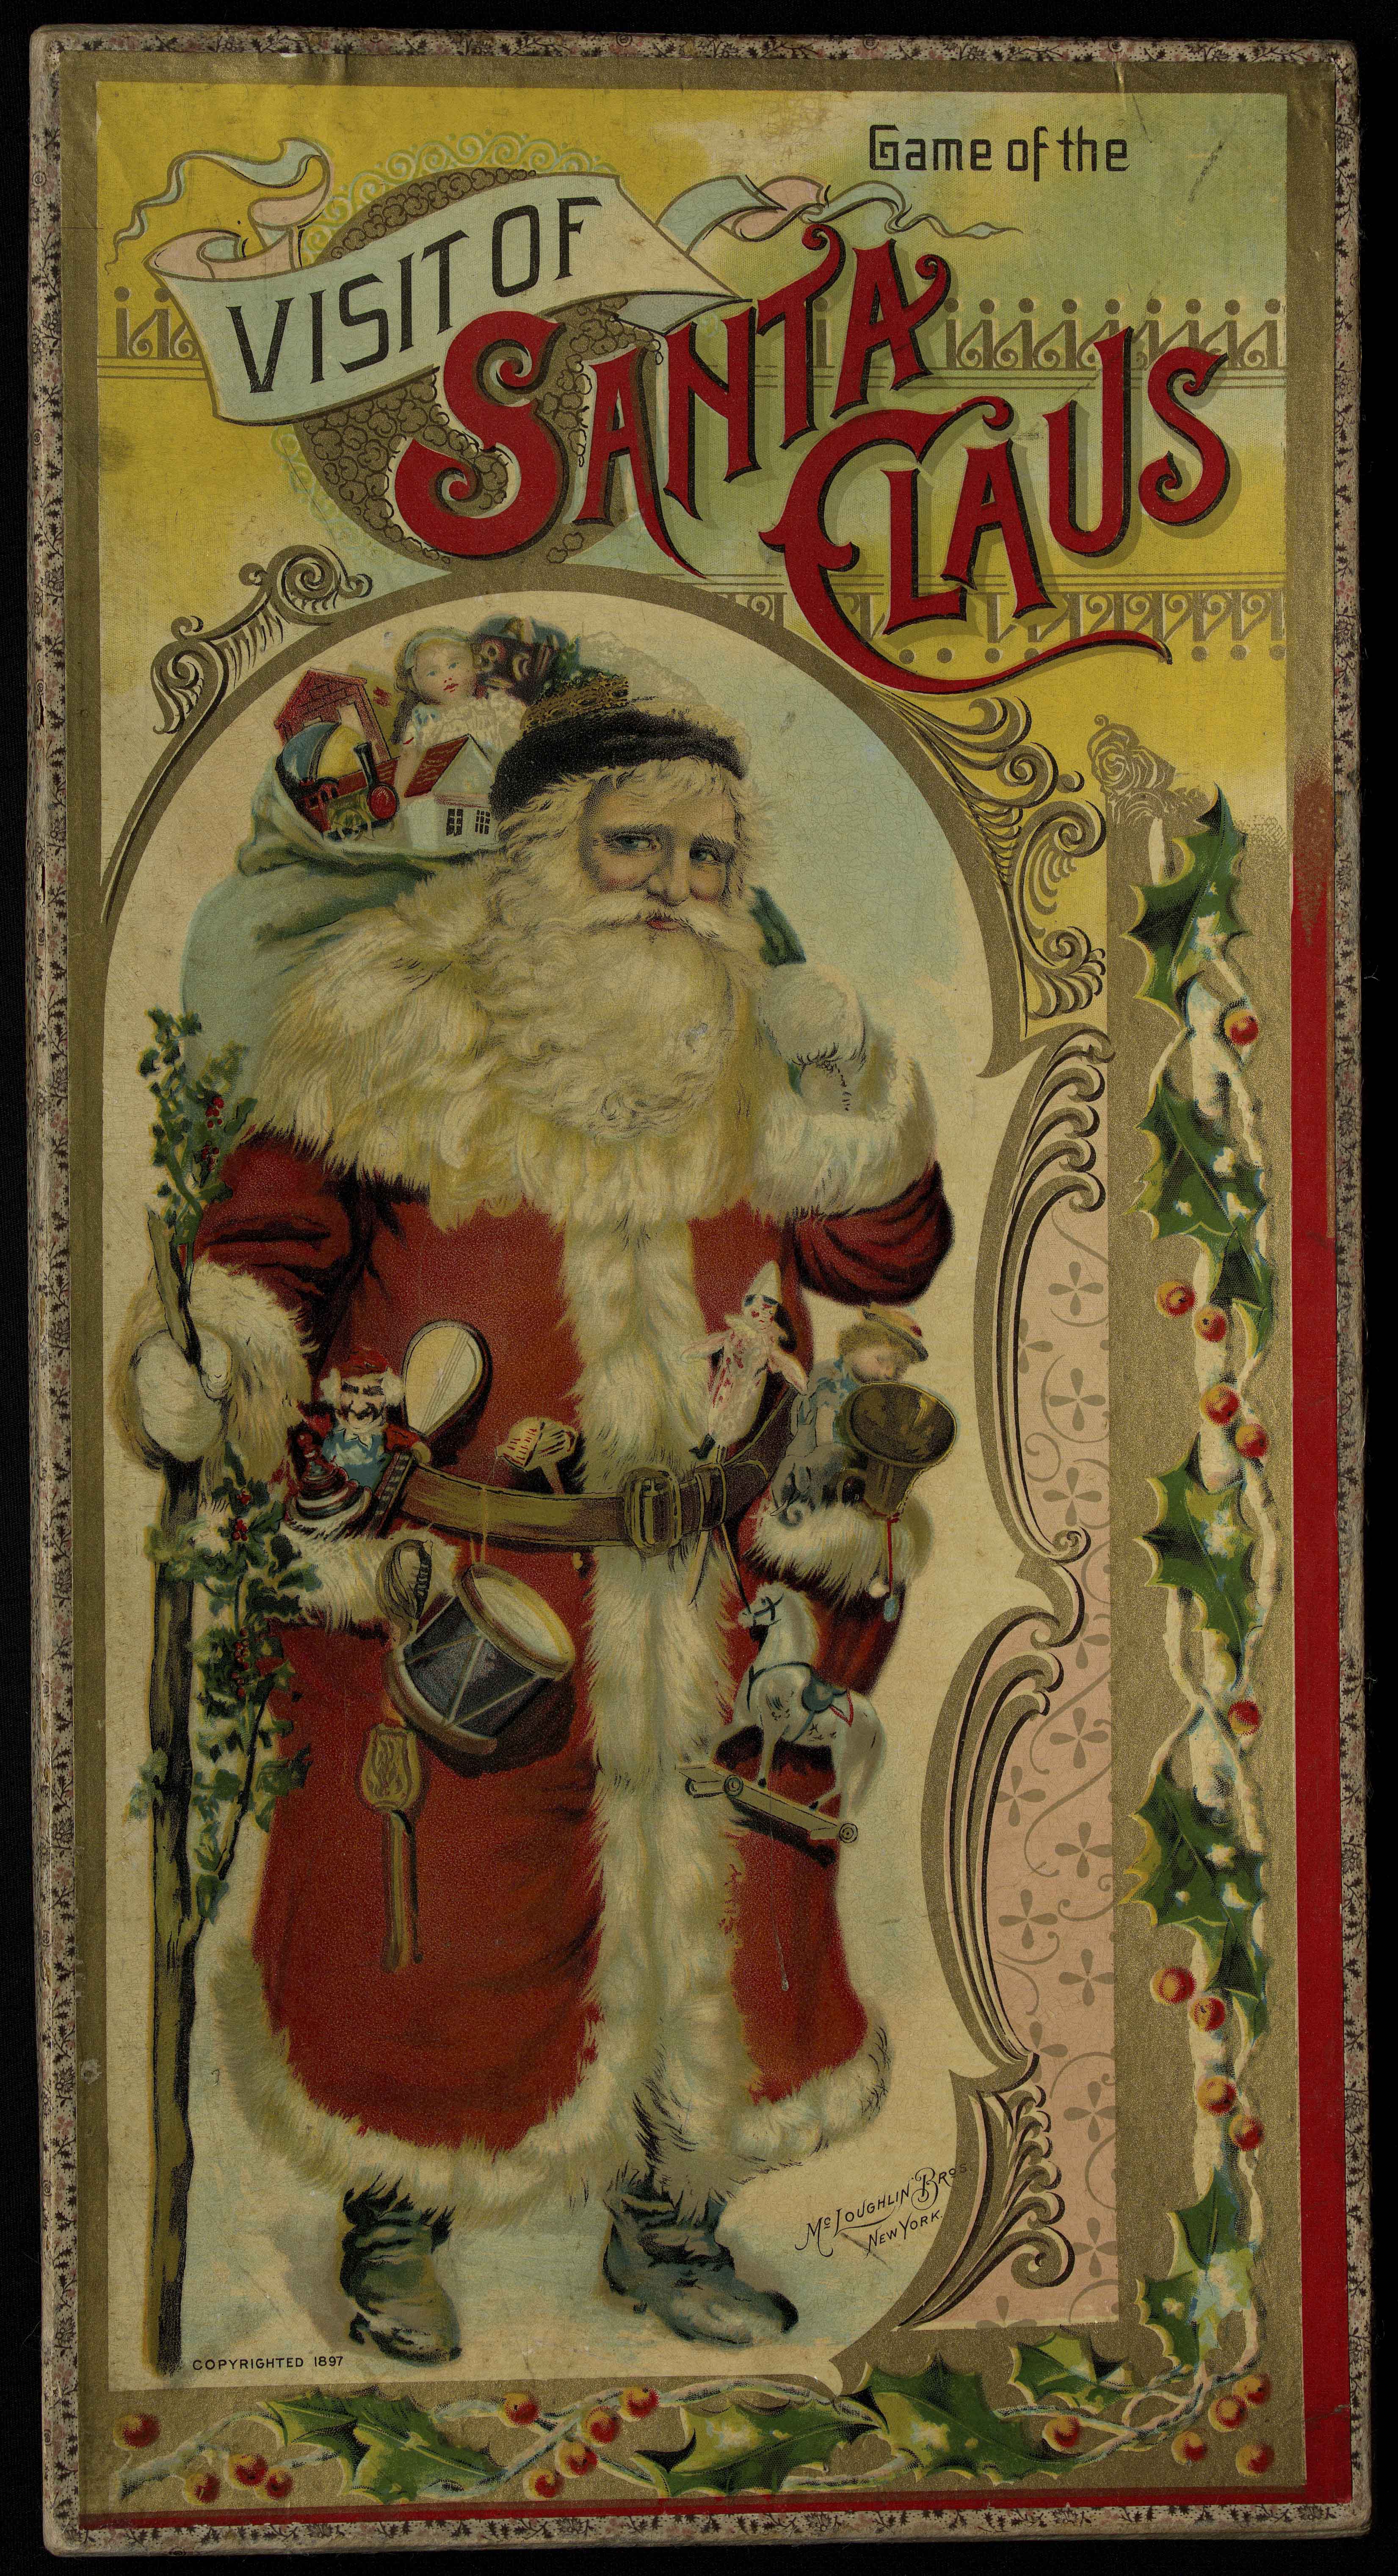 Game of the Visit of Santa Claus, 1897. Content compilation © 2020, by the American Antiquarian Society. All rights reserved.